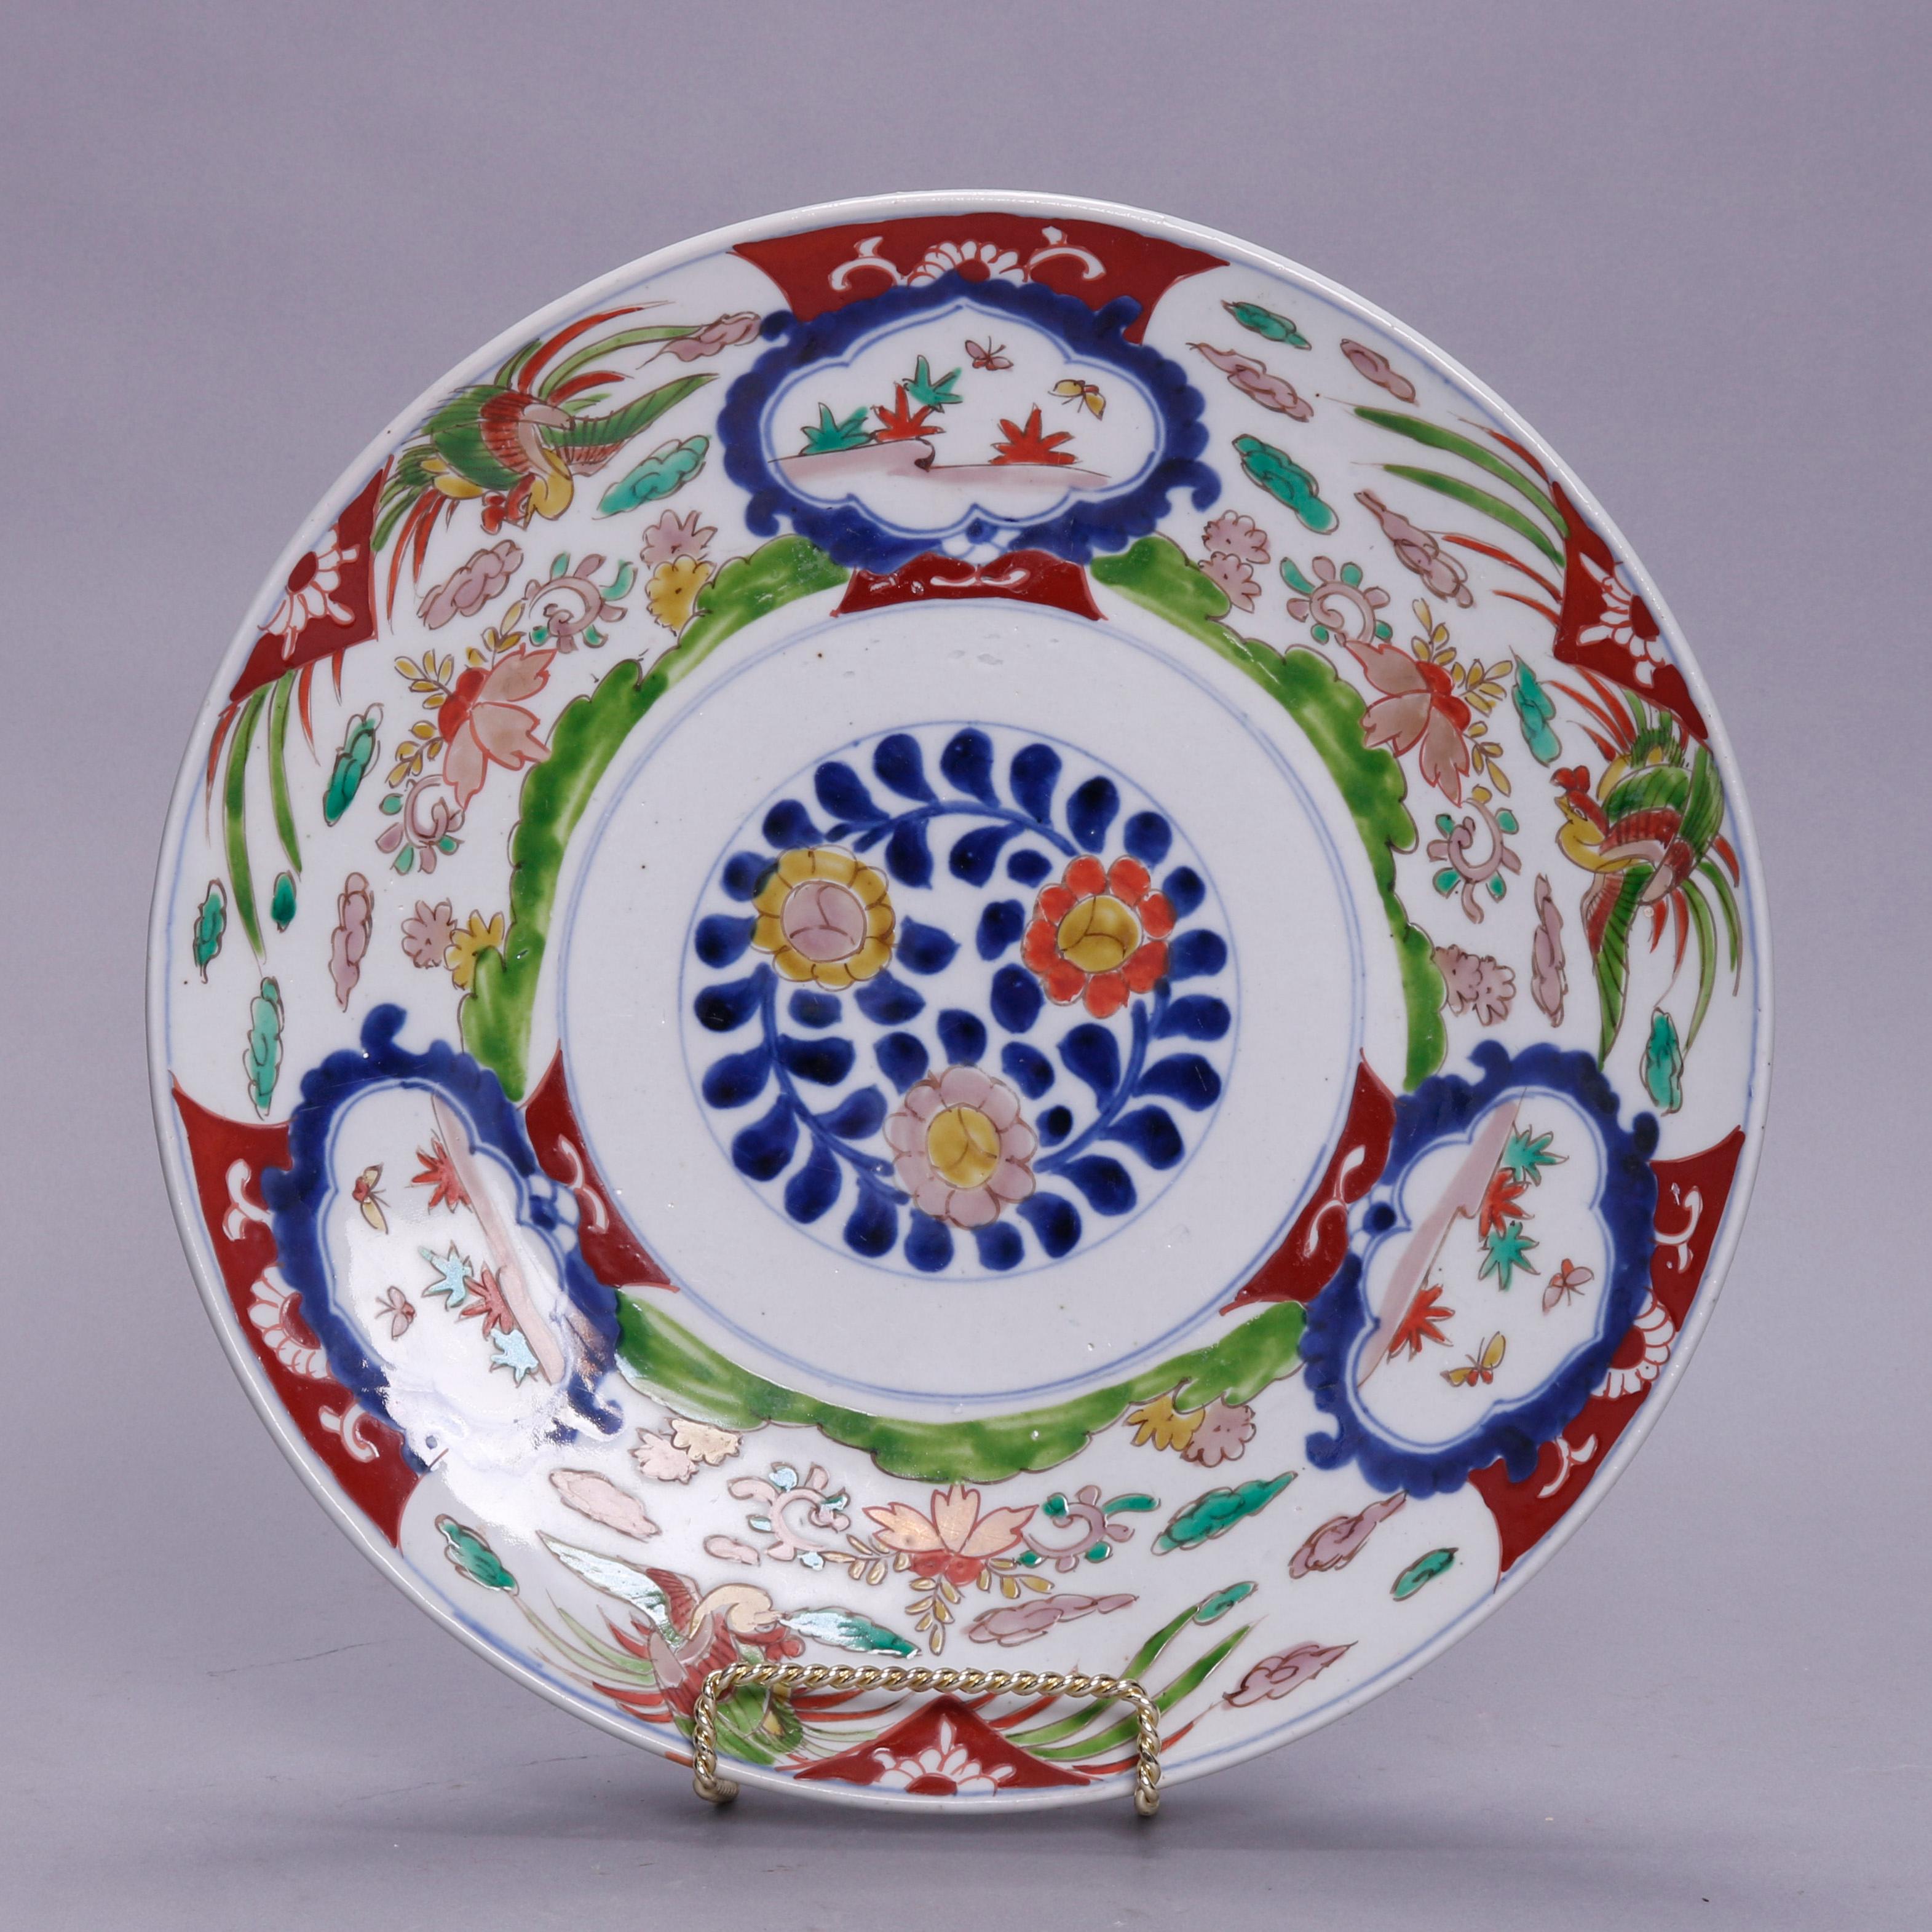 Fired Antique Japanese Imari Porcelain Charger with Garden Scenes, circa 1910